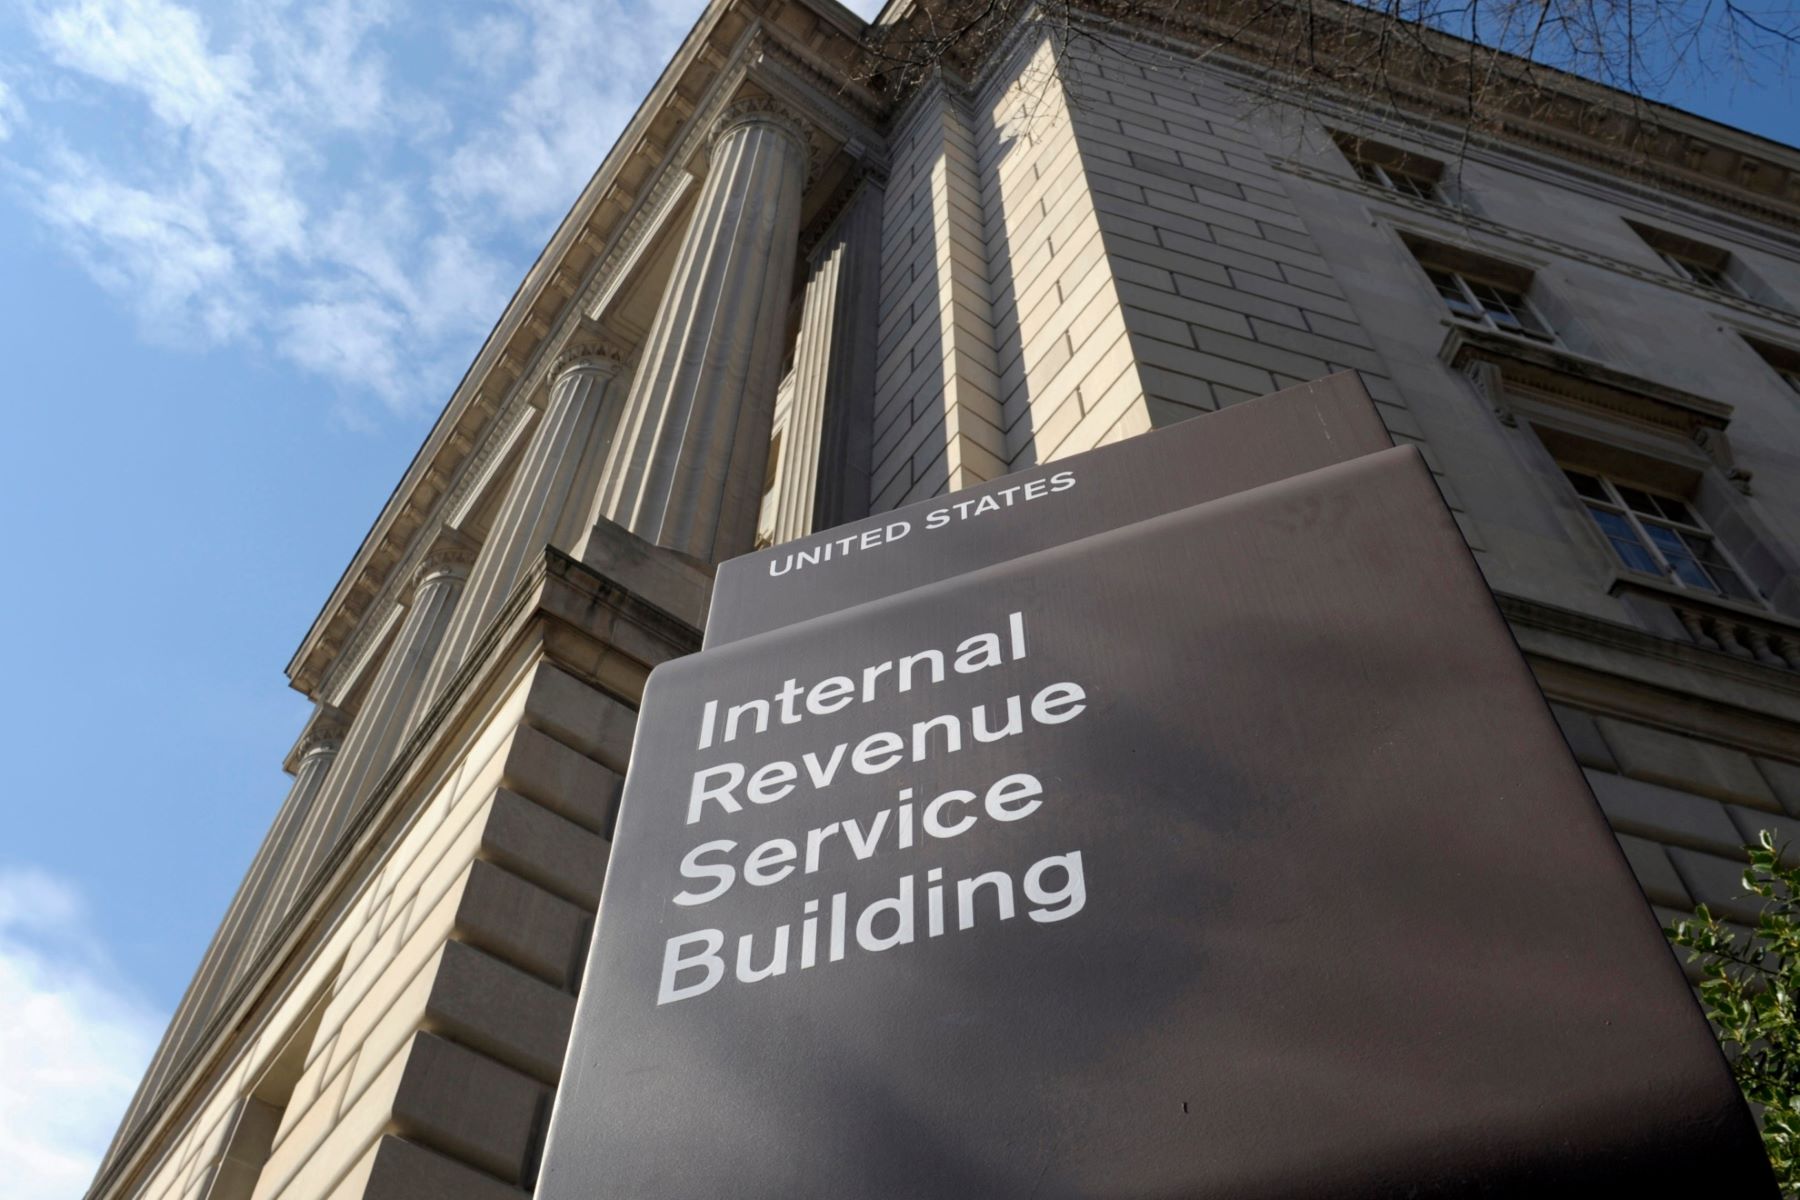 What Time Is Best To Call The IRS?